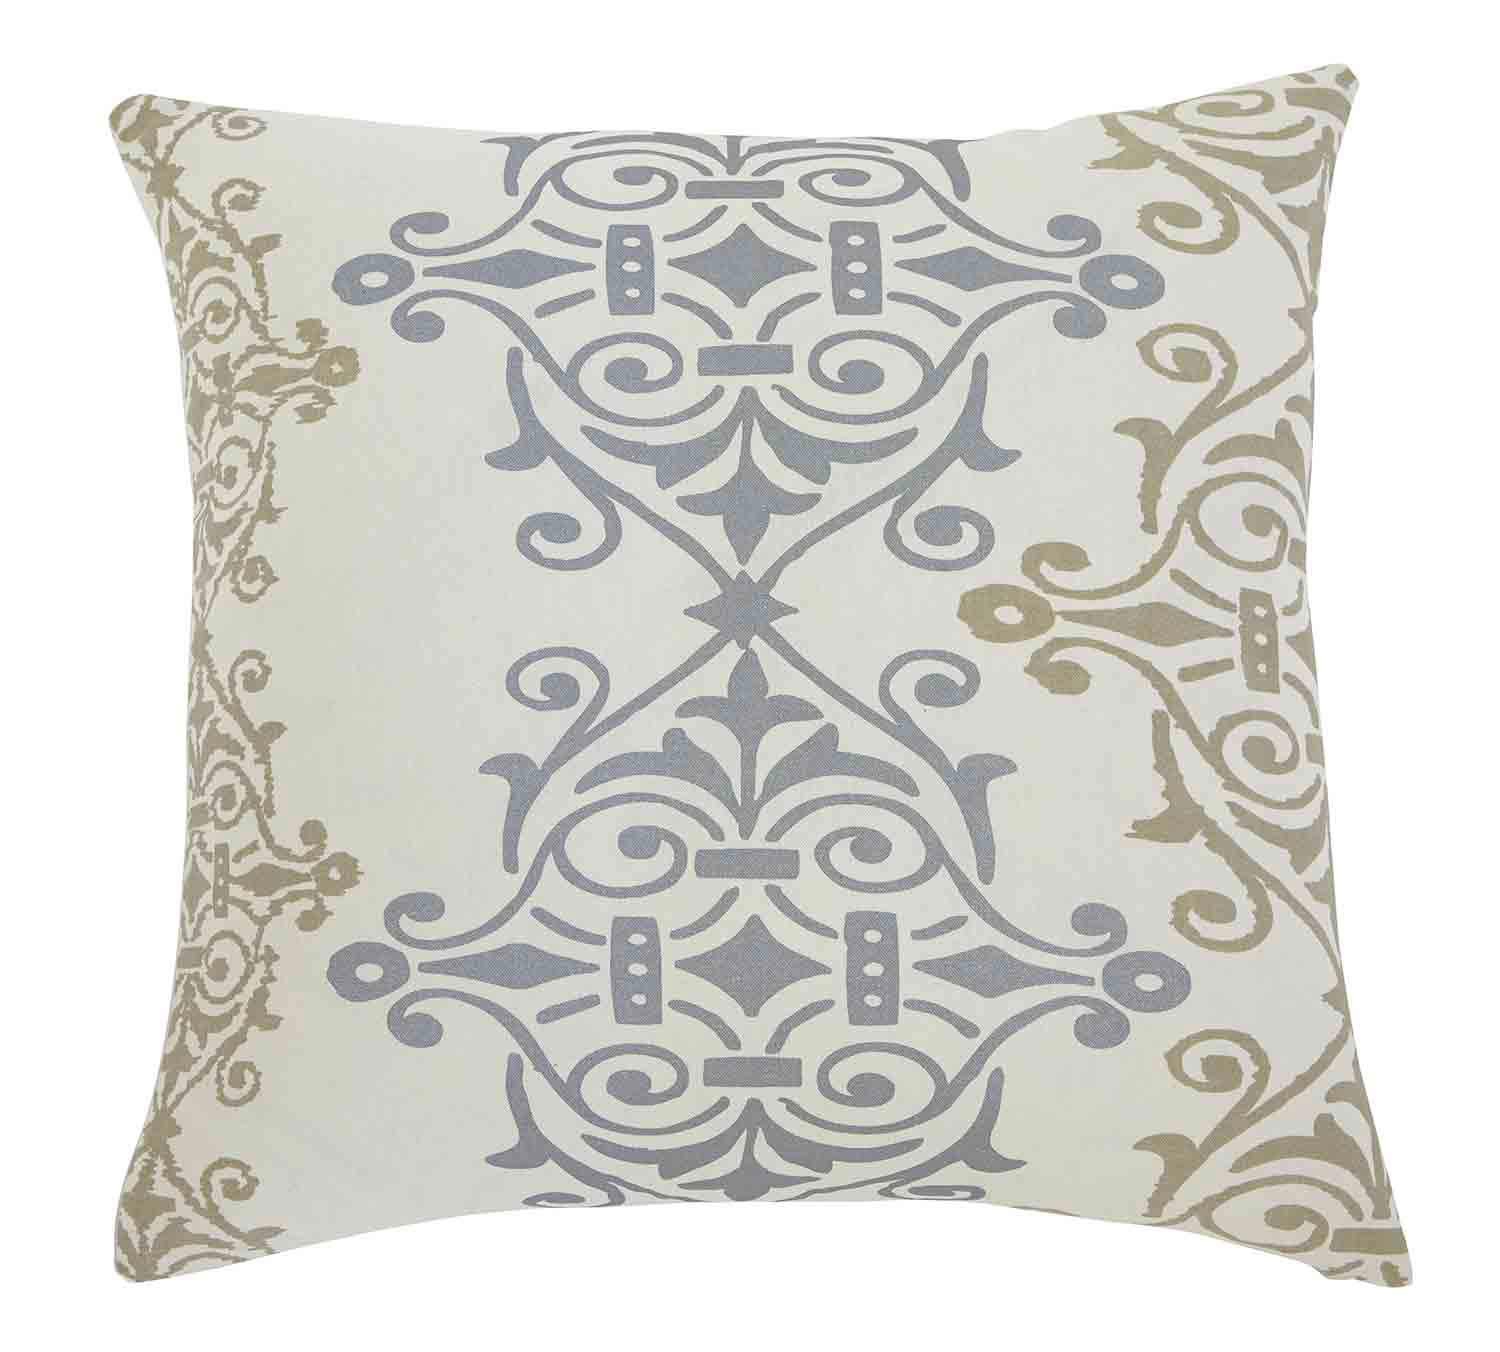 Ashley Scroll Pillow Cover - Set of 4 - Gray/Brown